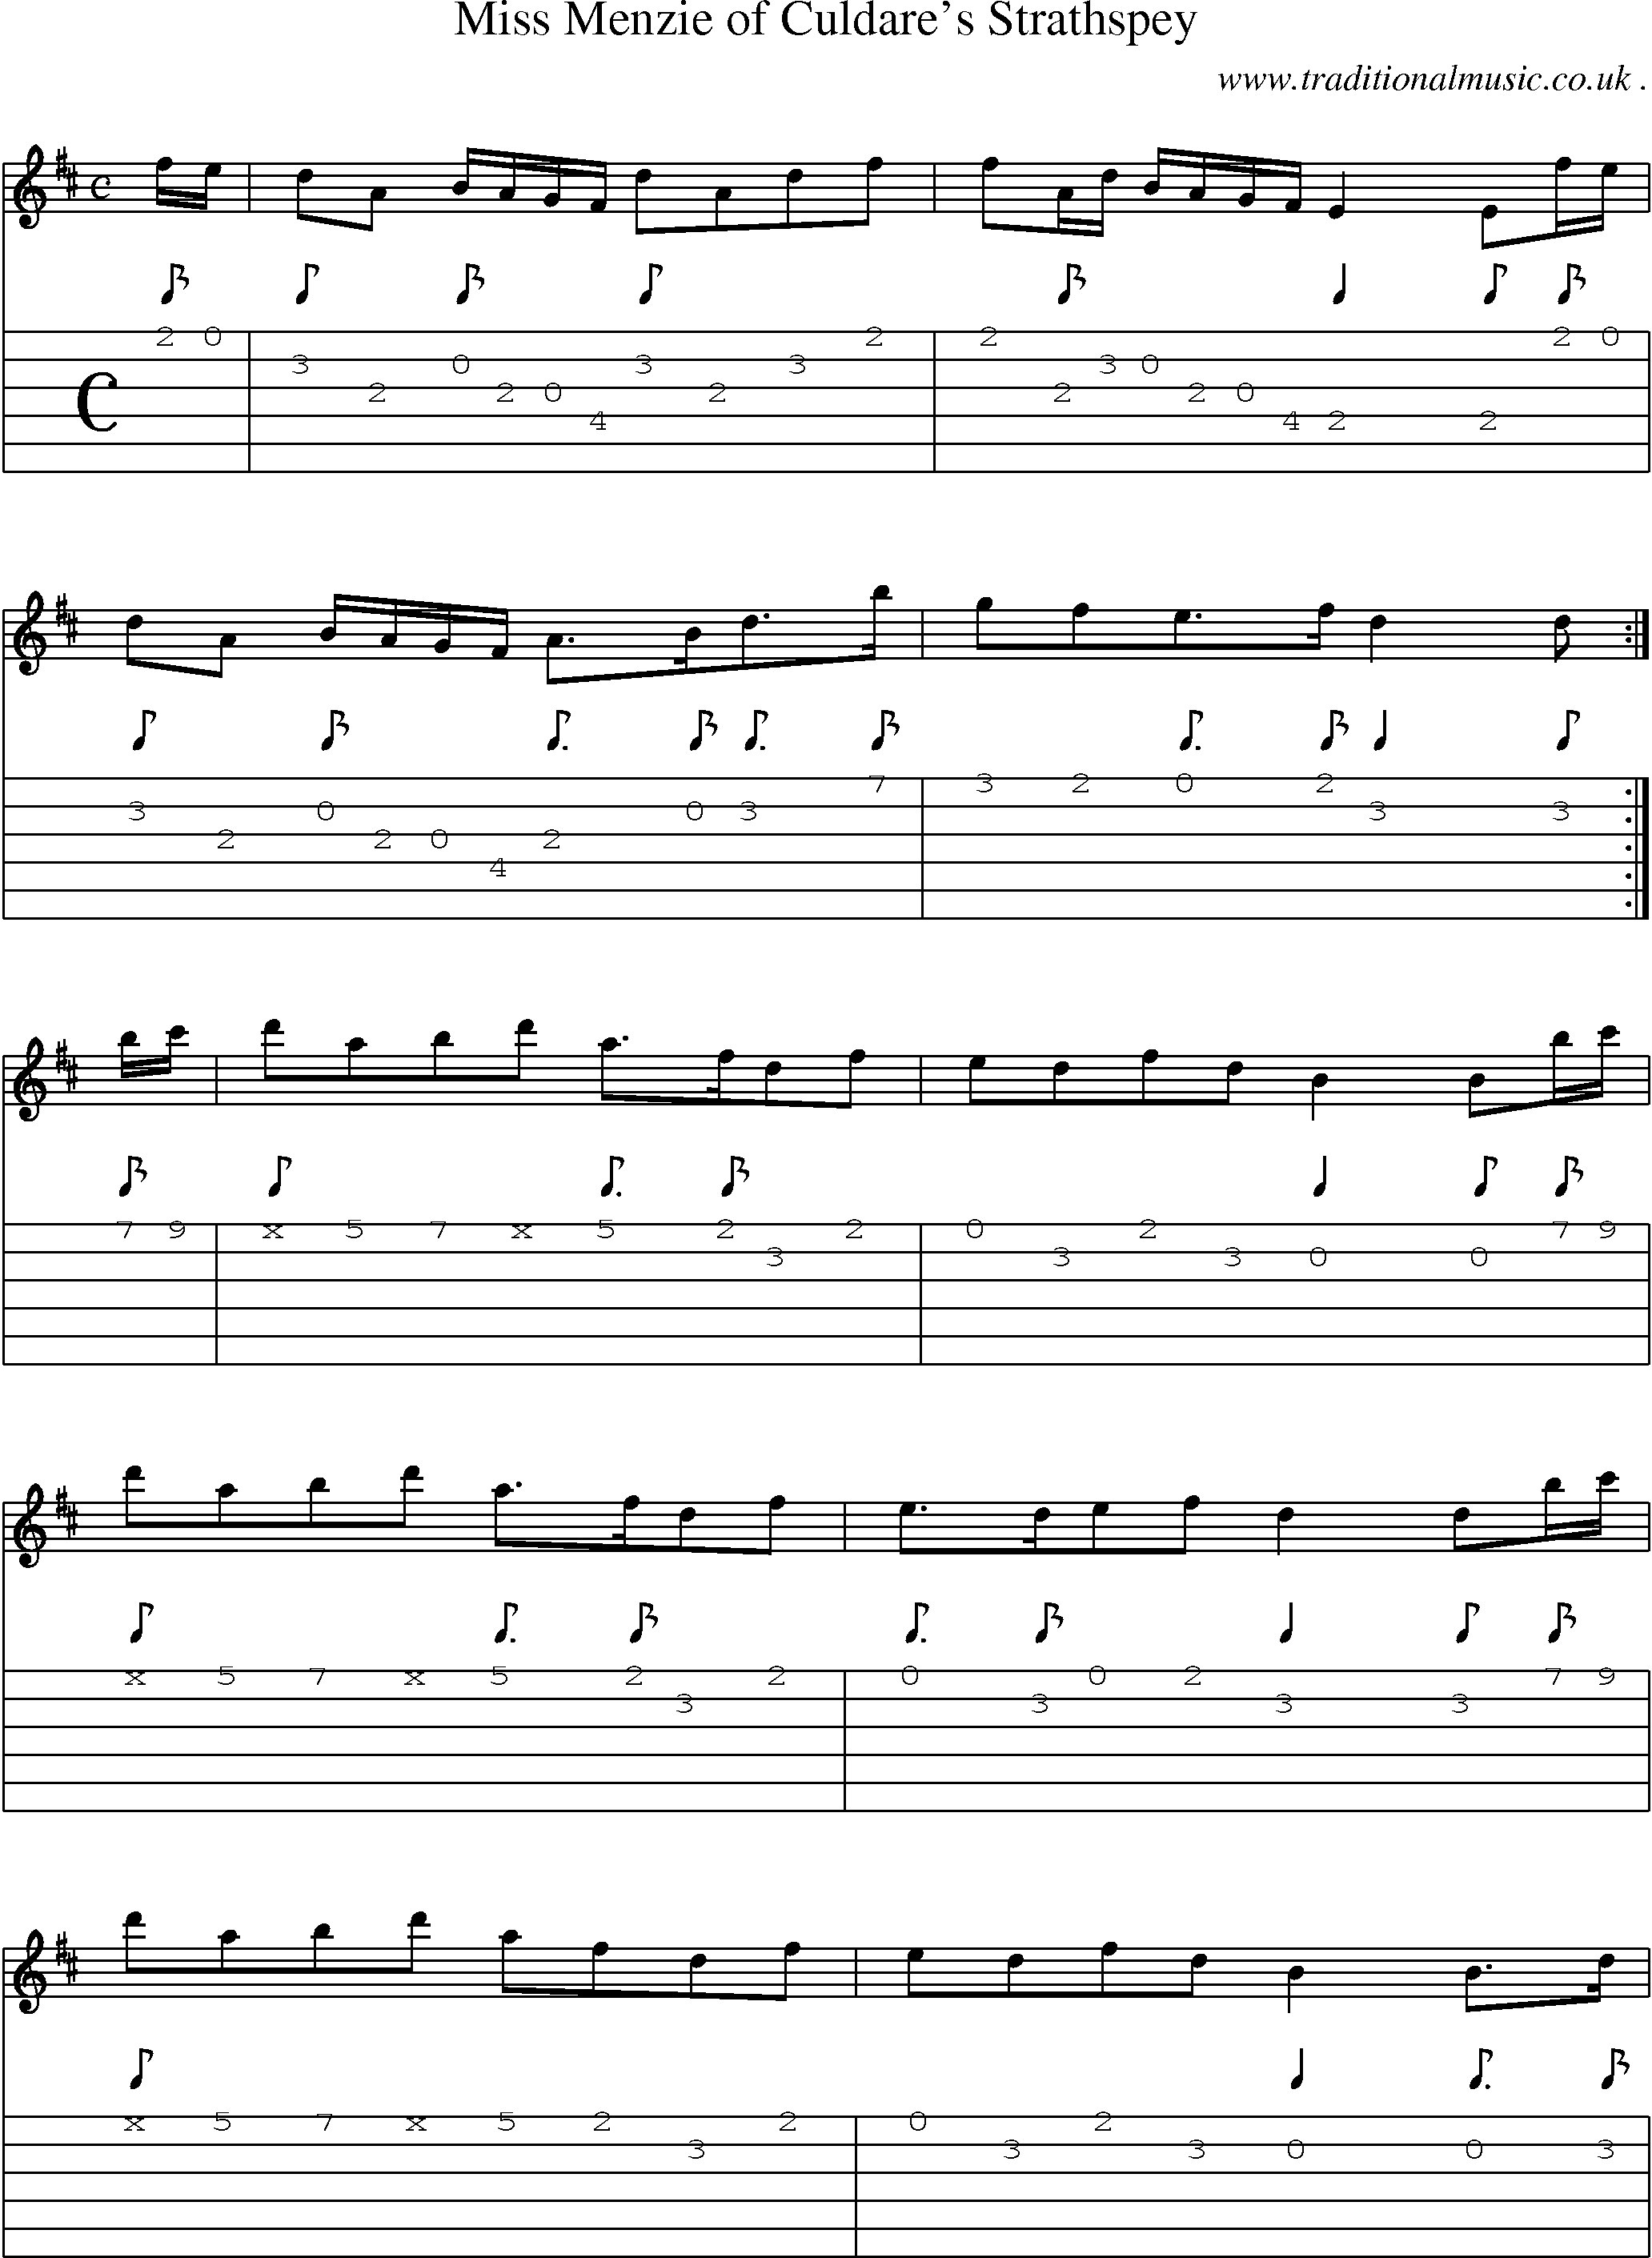 Sheet-Music and Guitar Tabs for Miss Menzie Of Culdares Strathspey